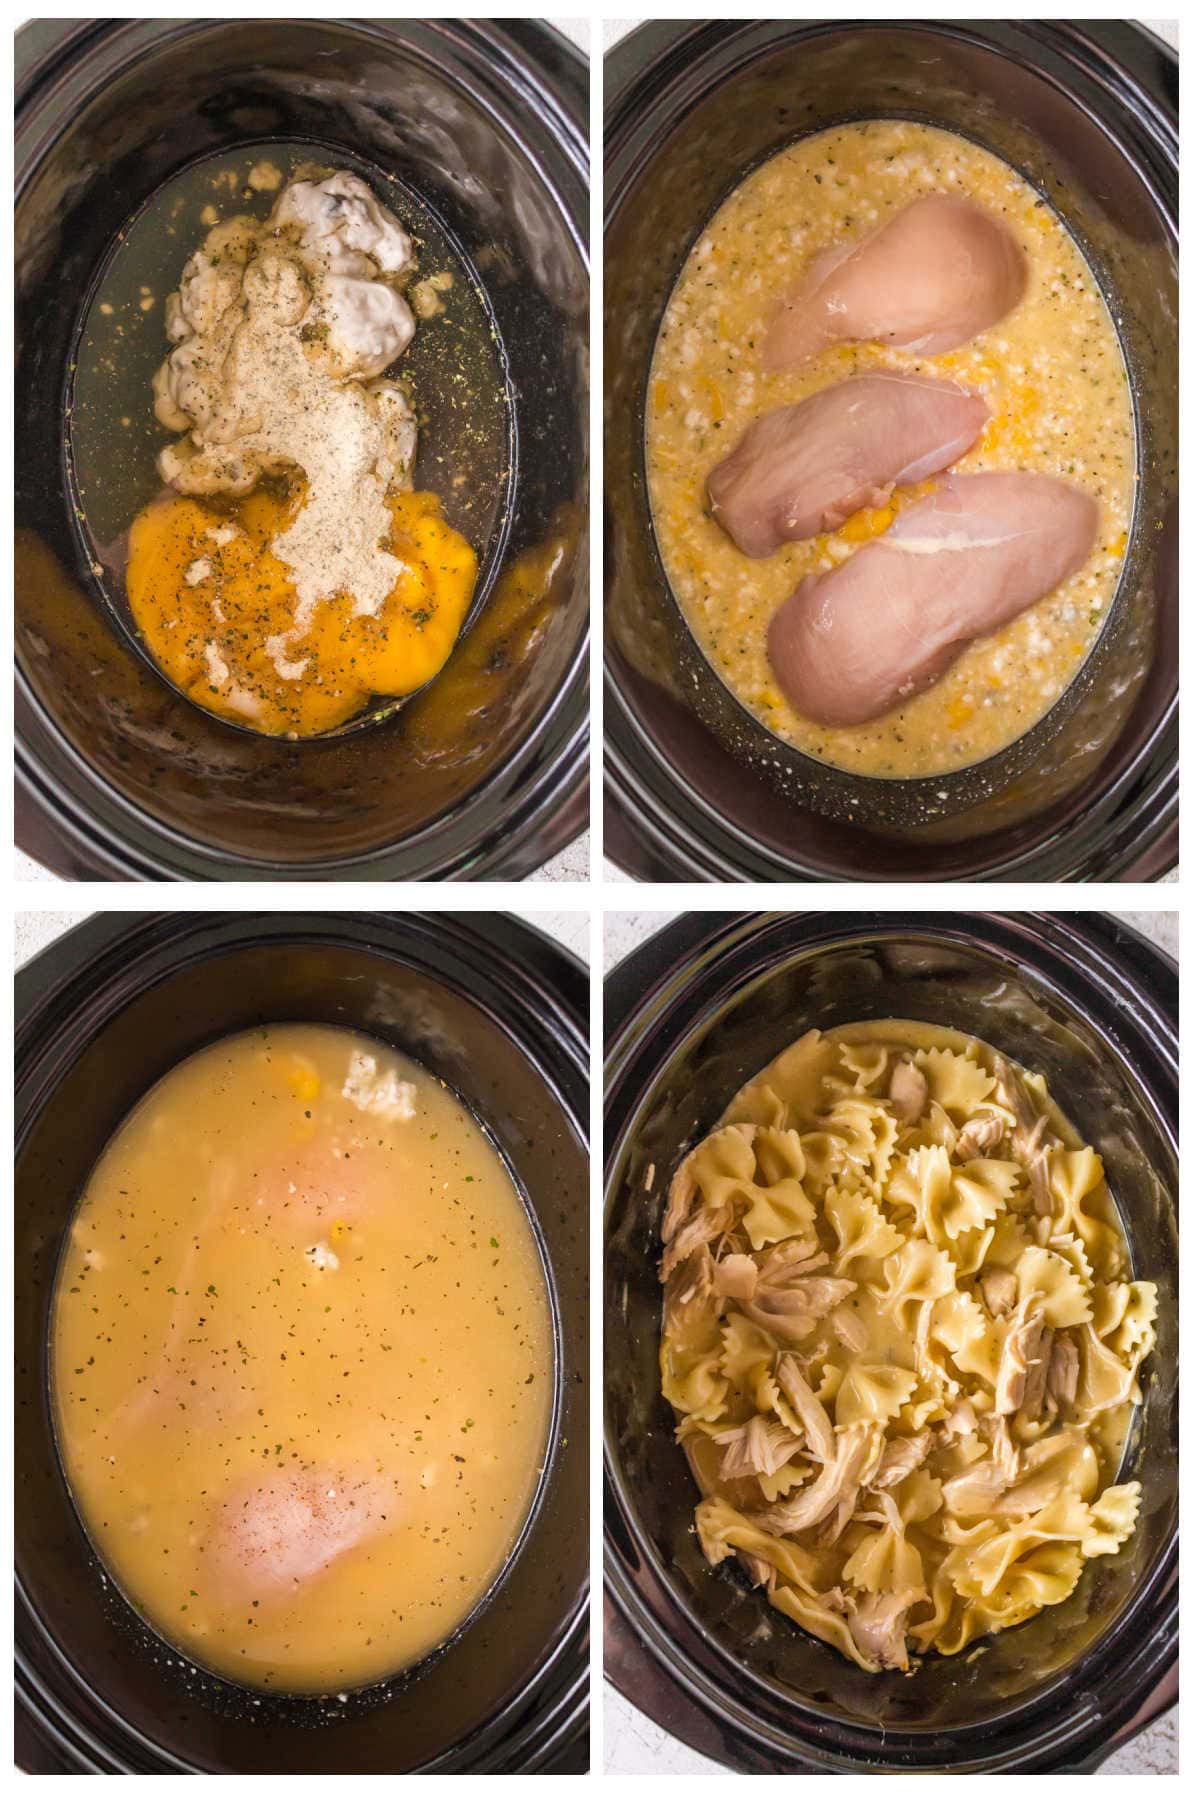 Step by step images showing how to make this slow cooker chicken recipe.